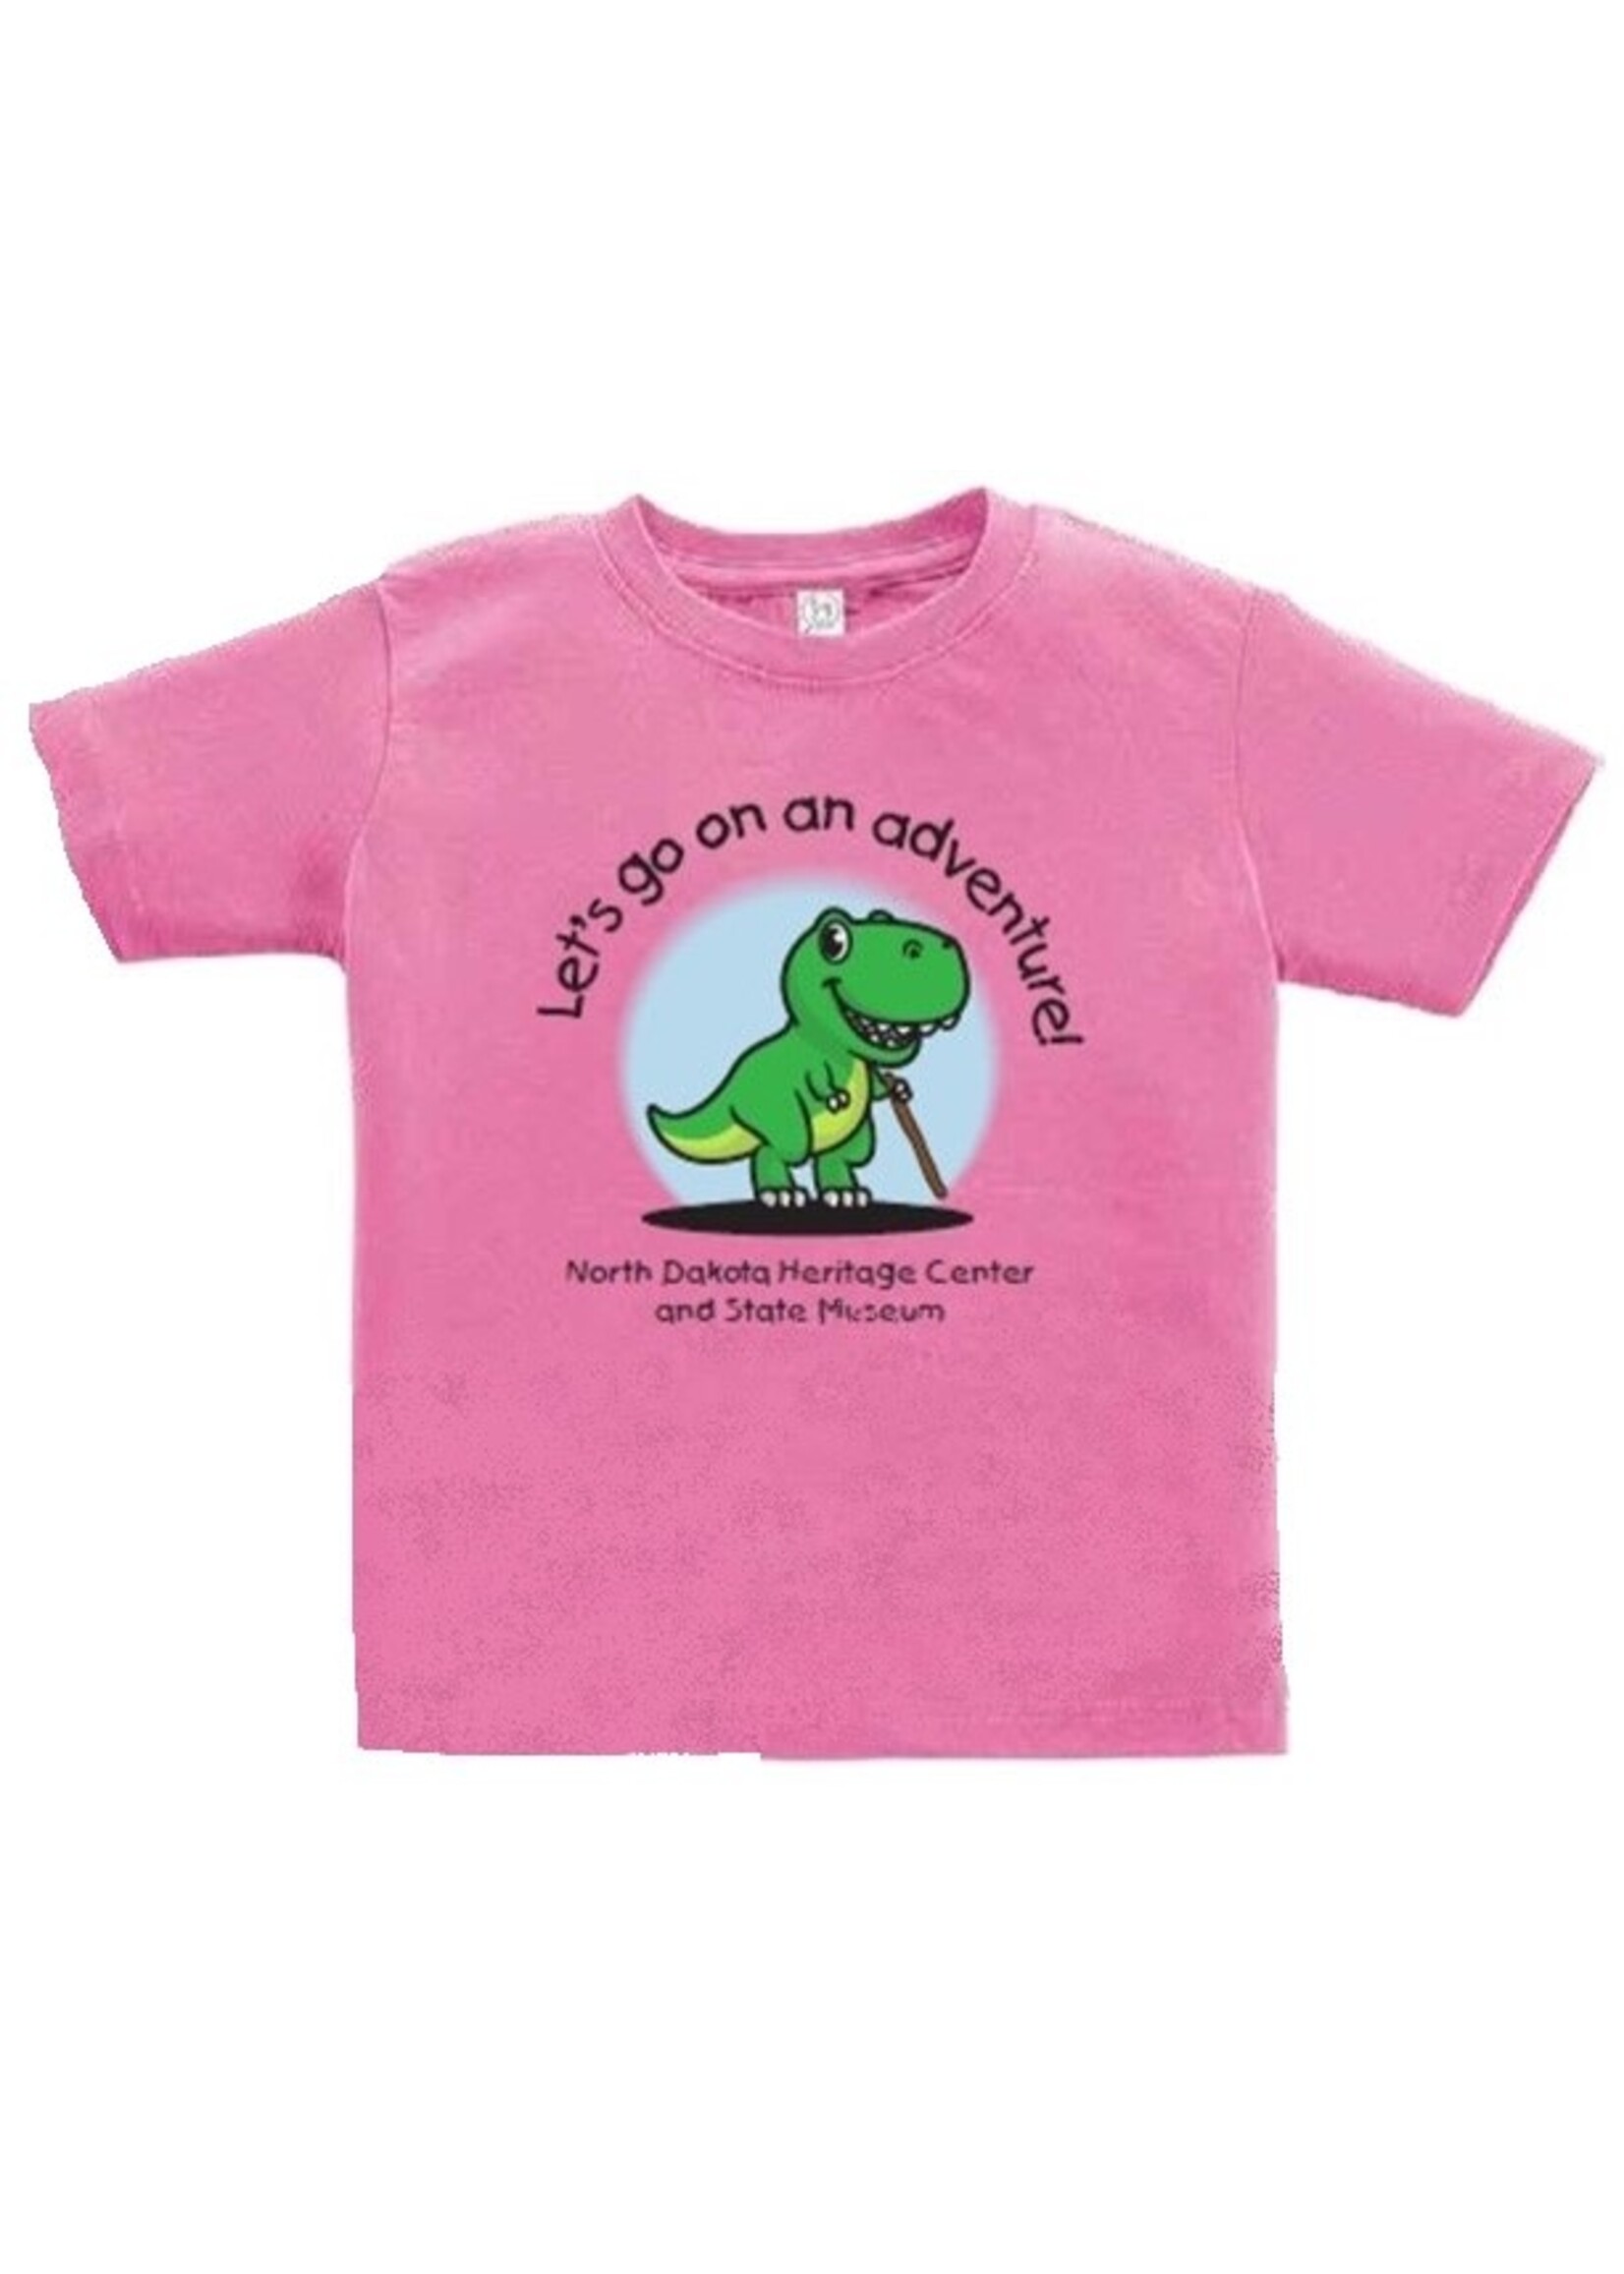 Let's Go On an Adventure! T-Rex Toddler Tee